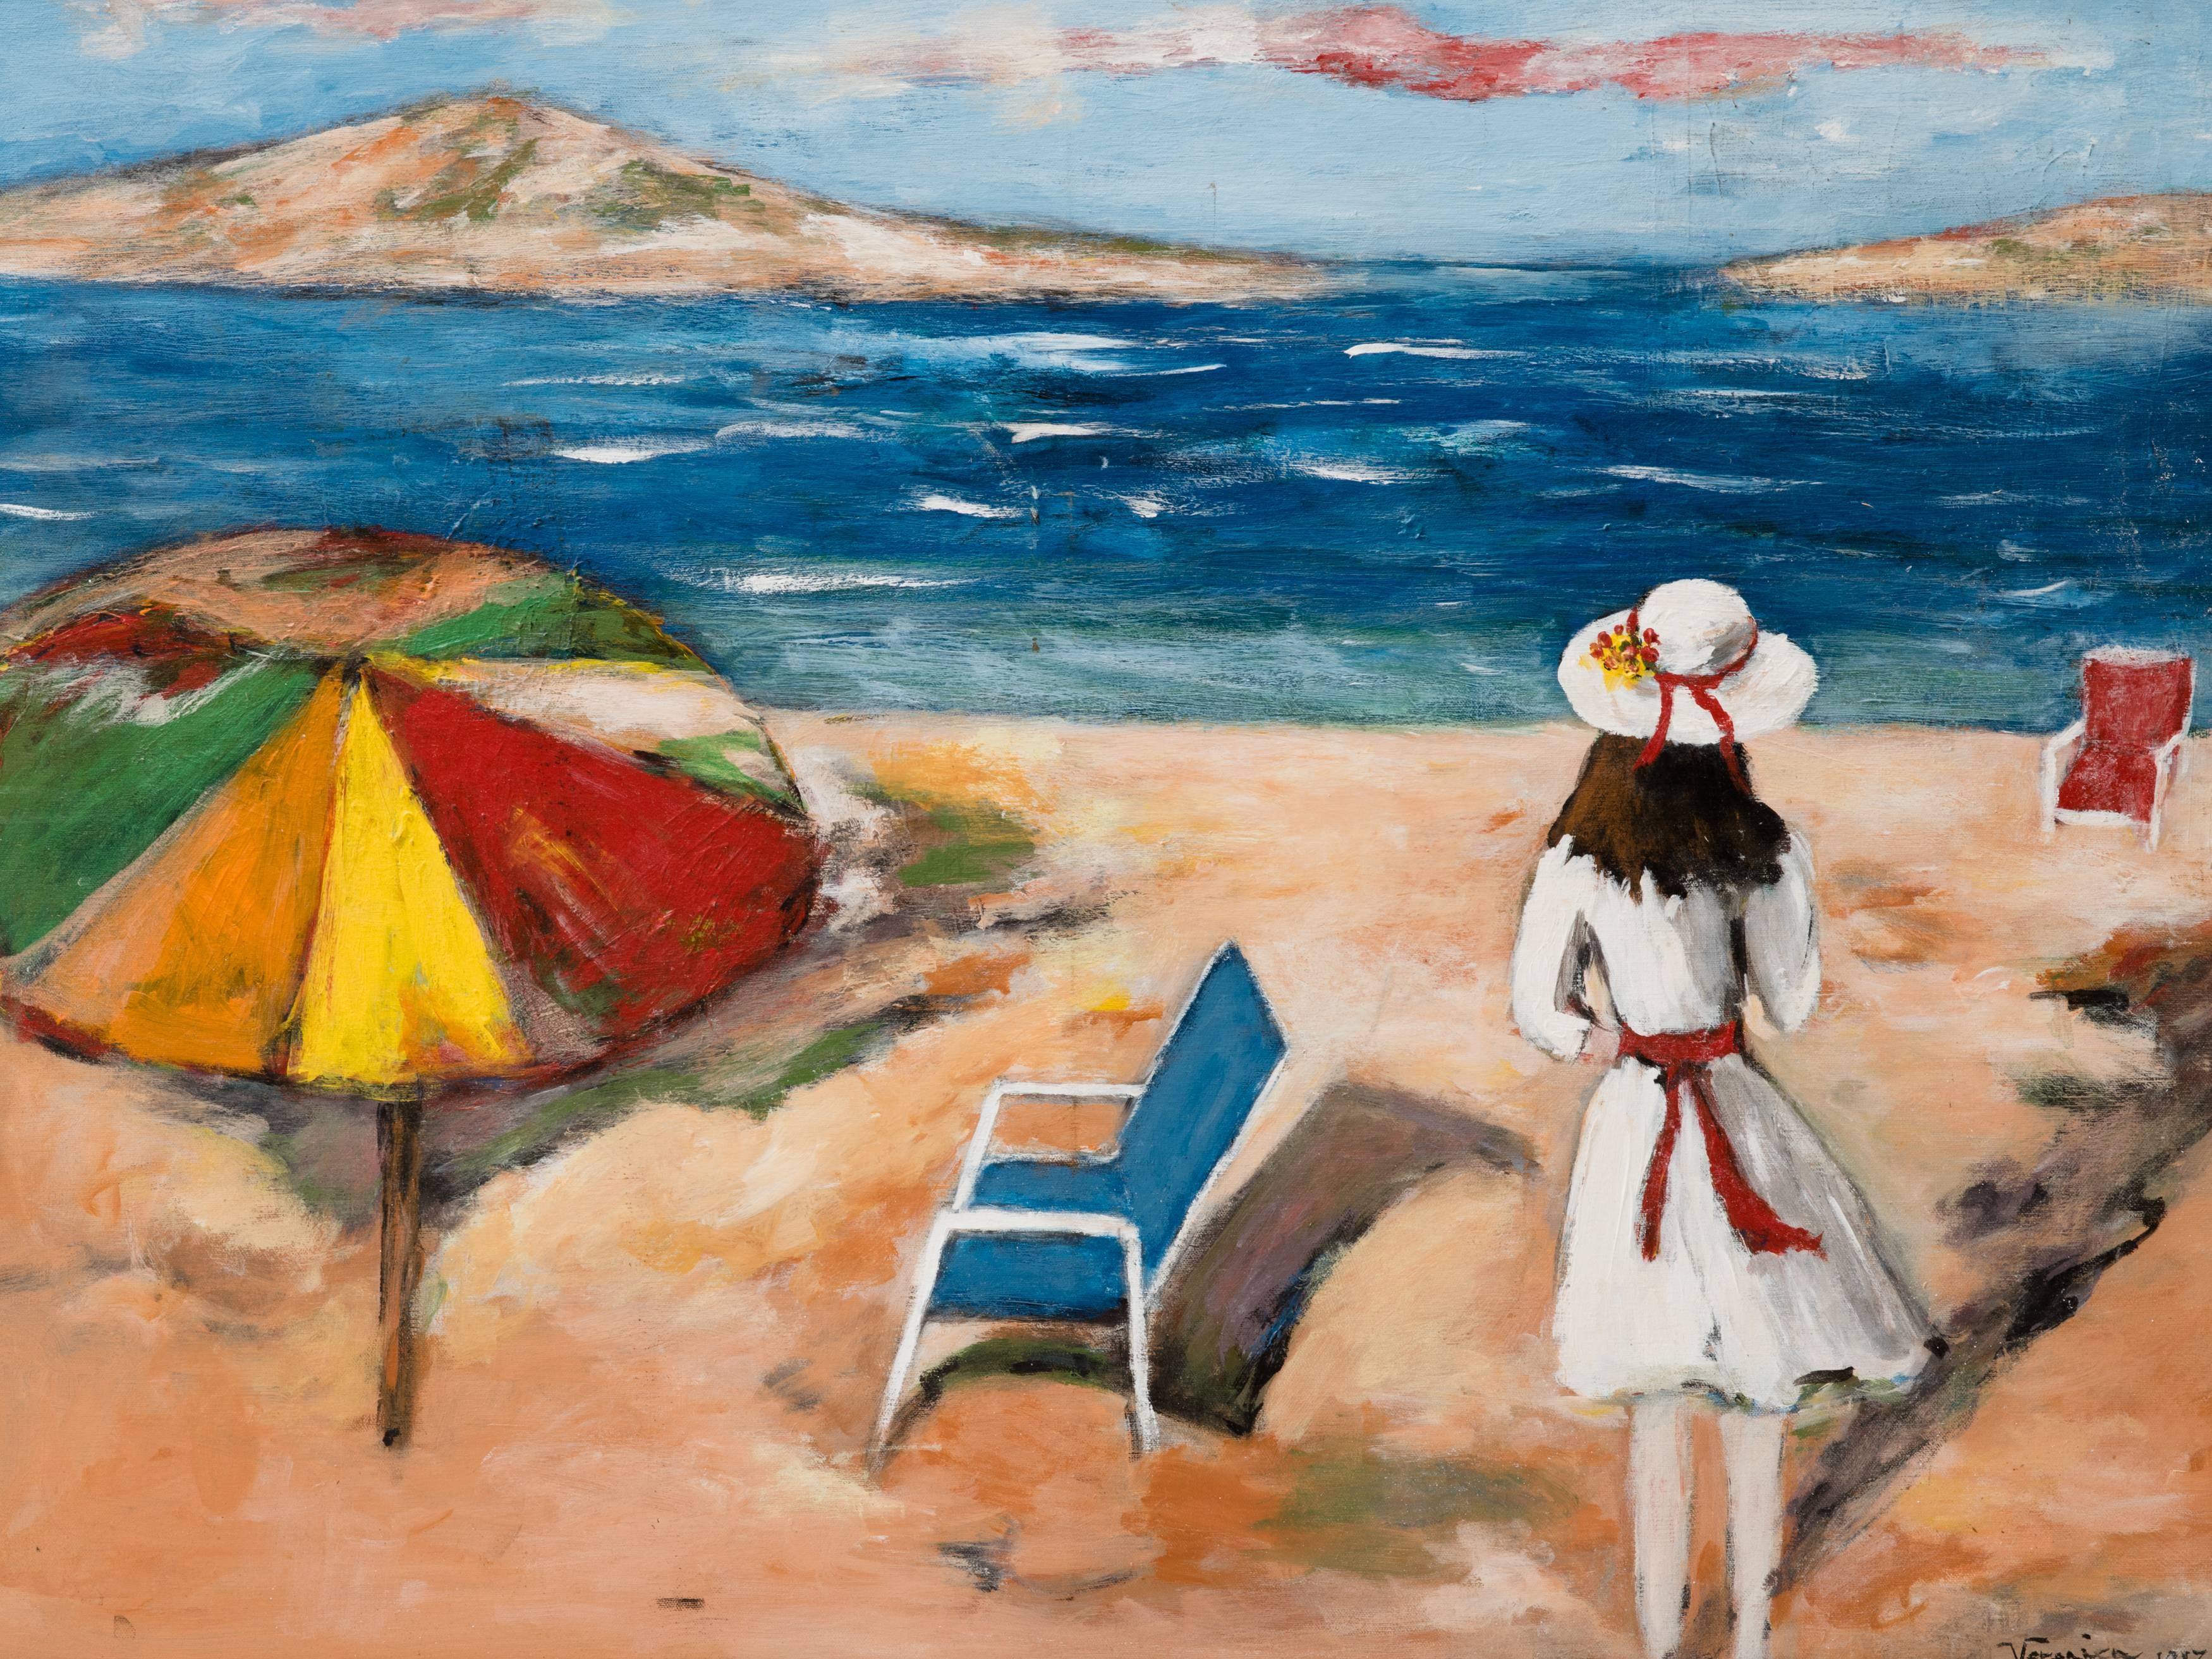 Surrealist Mediterranean beach scene painting of girl facing sea, two empty modernist beach chairs, and graphic umbrella. Signed, Veronica, 1983.